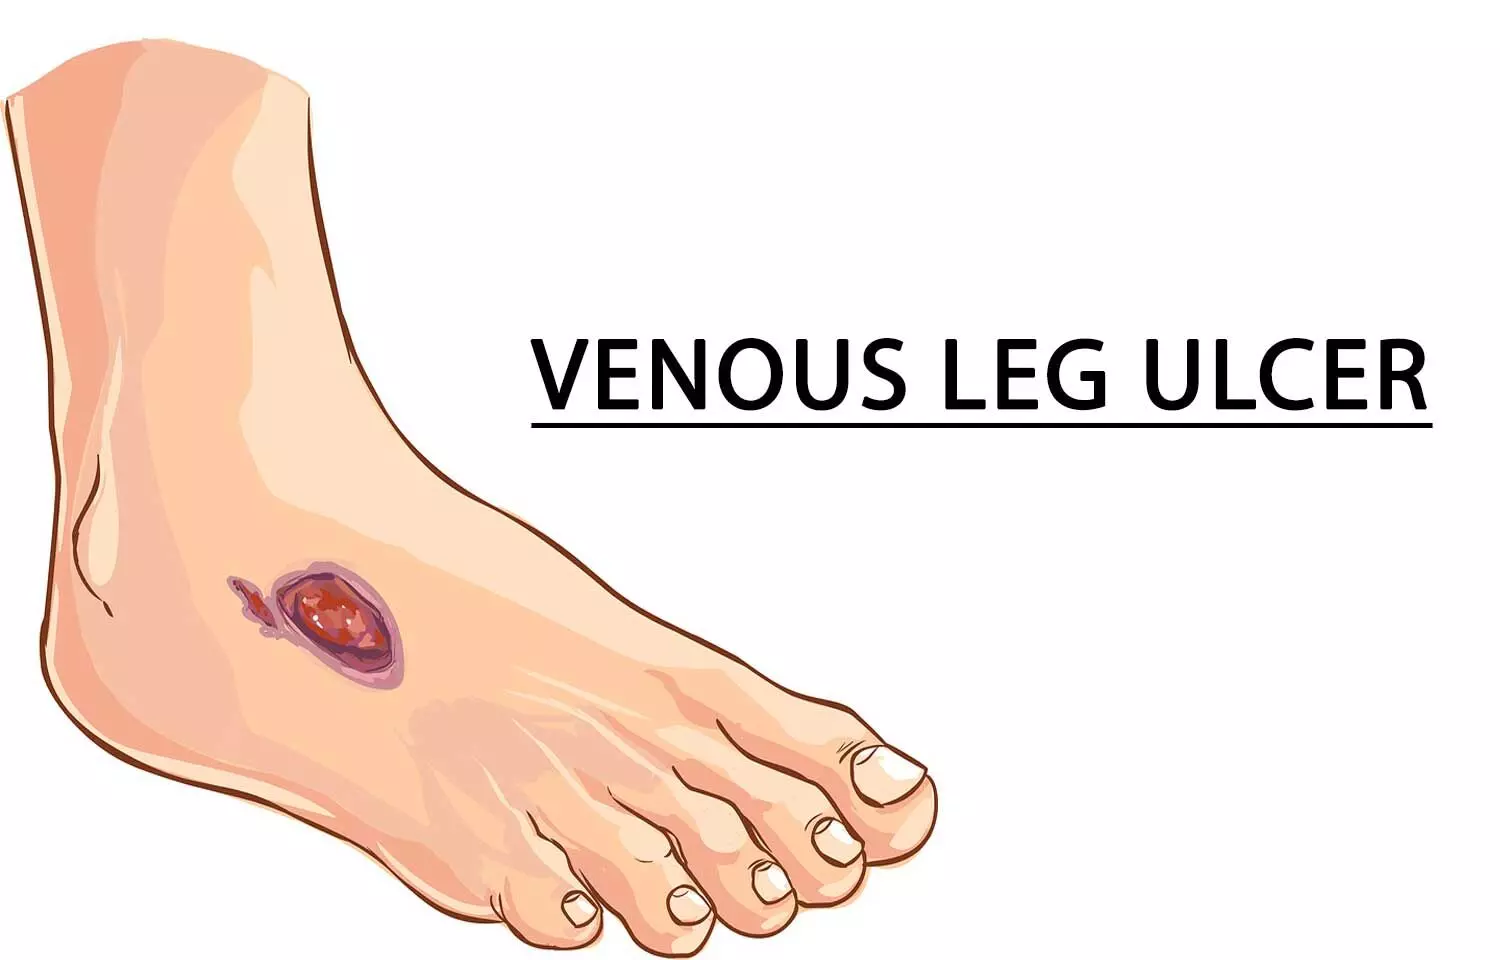 Early surgical interventions linked to faster healing of venous leg ulcers: Study